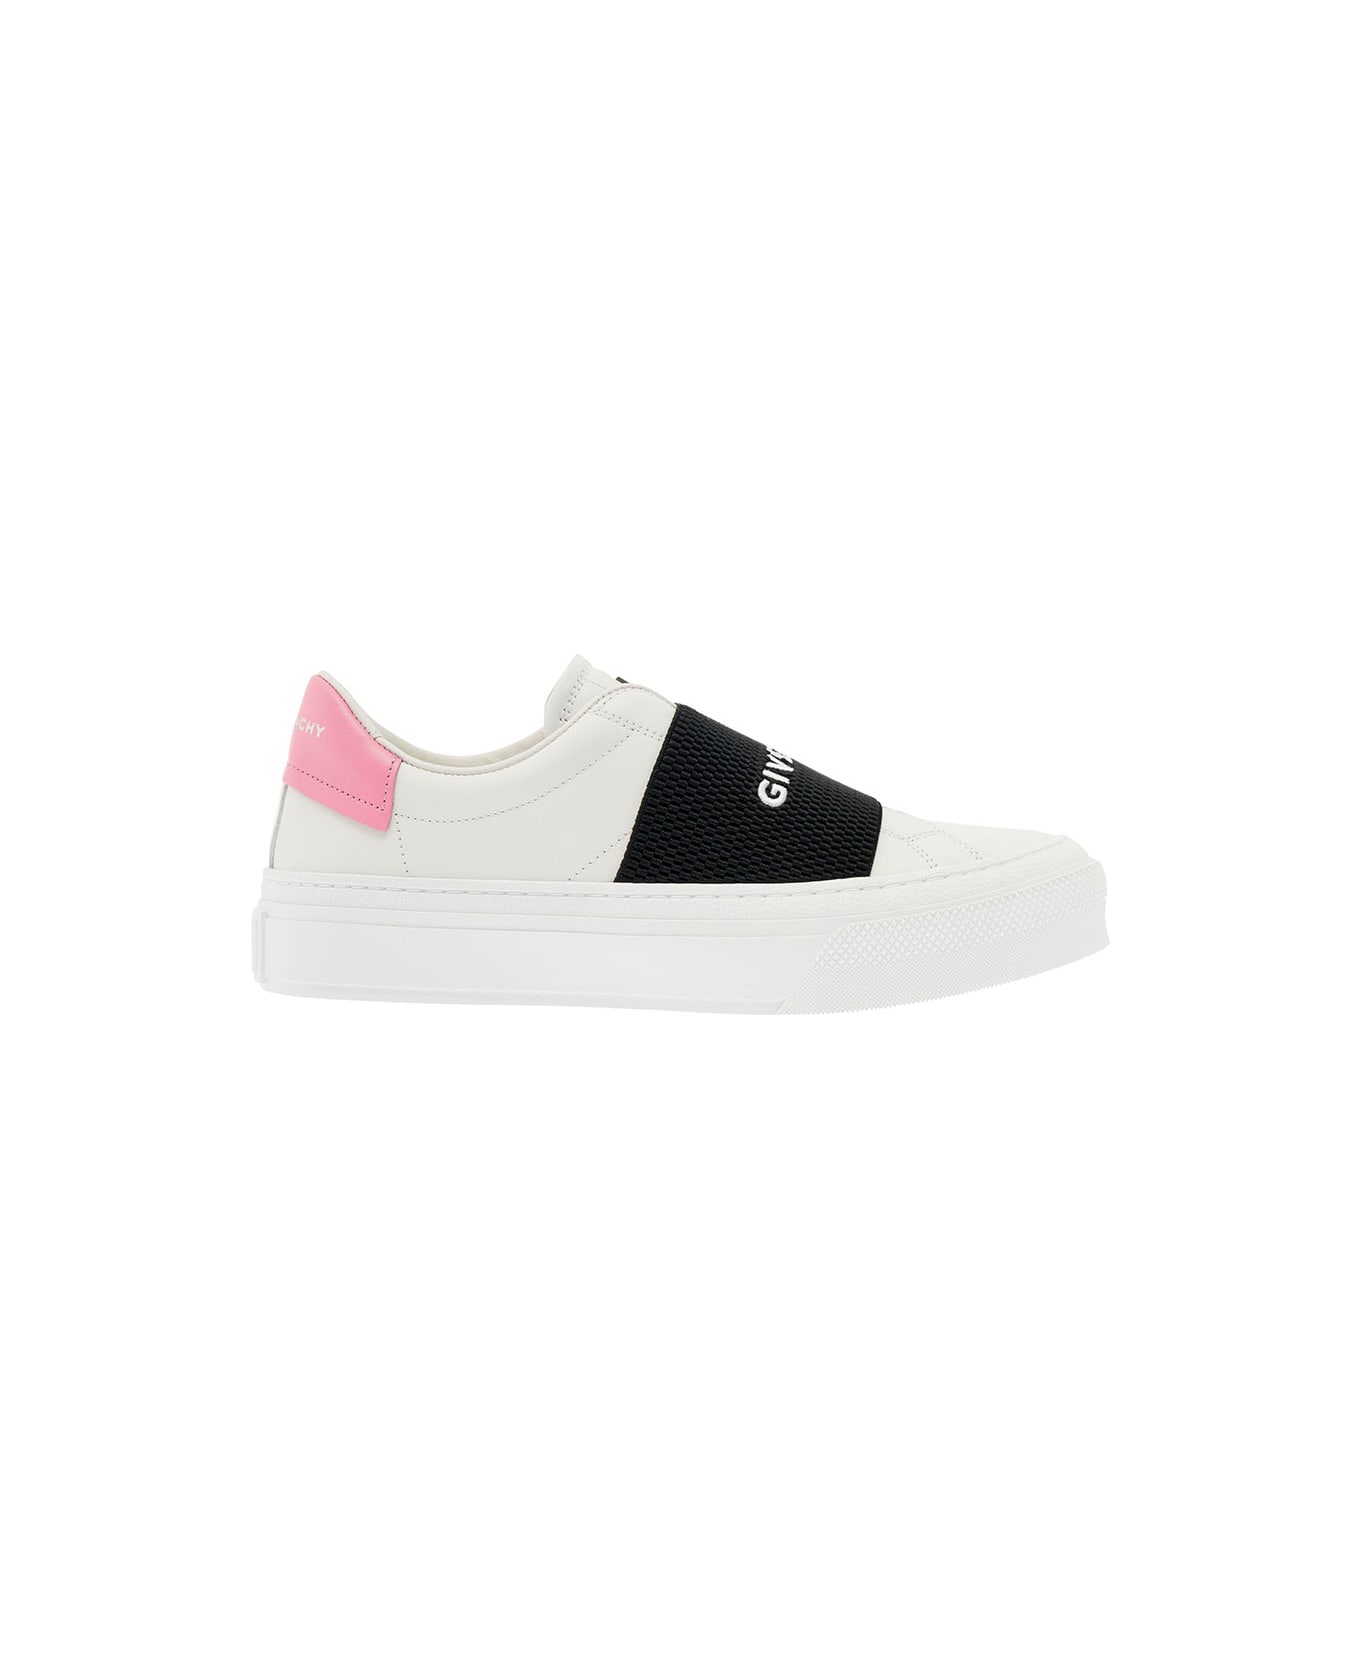 Givenchy Sneakers In White Leather - White Black Pink